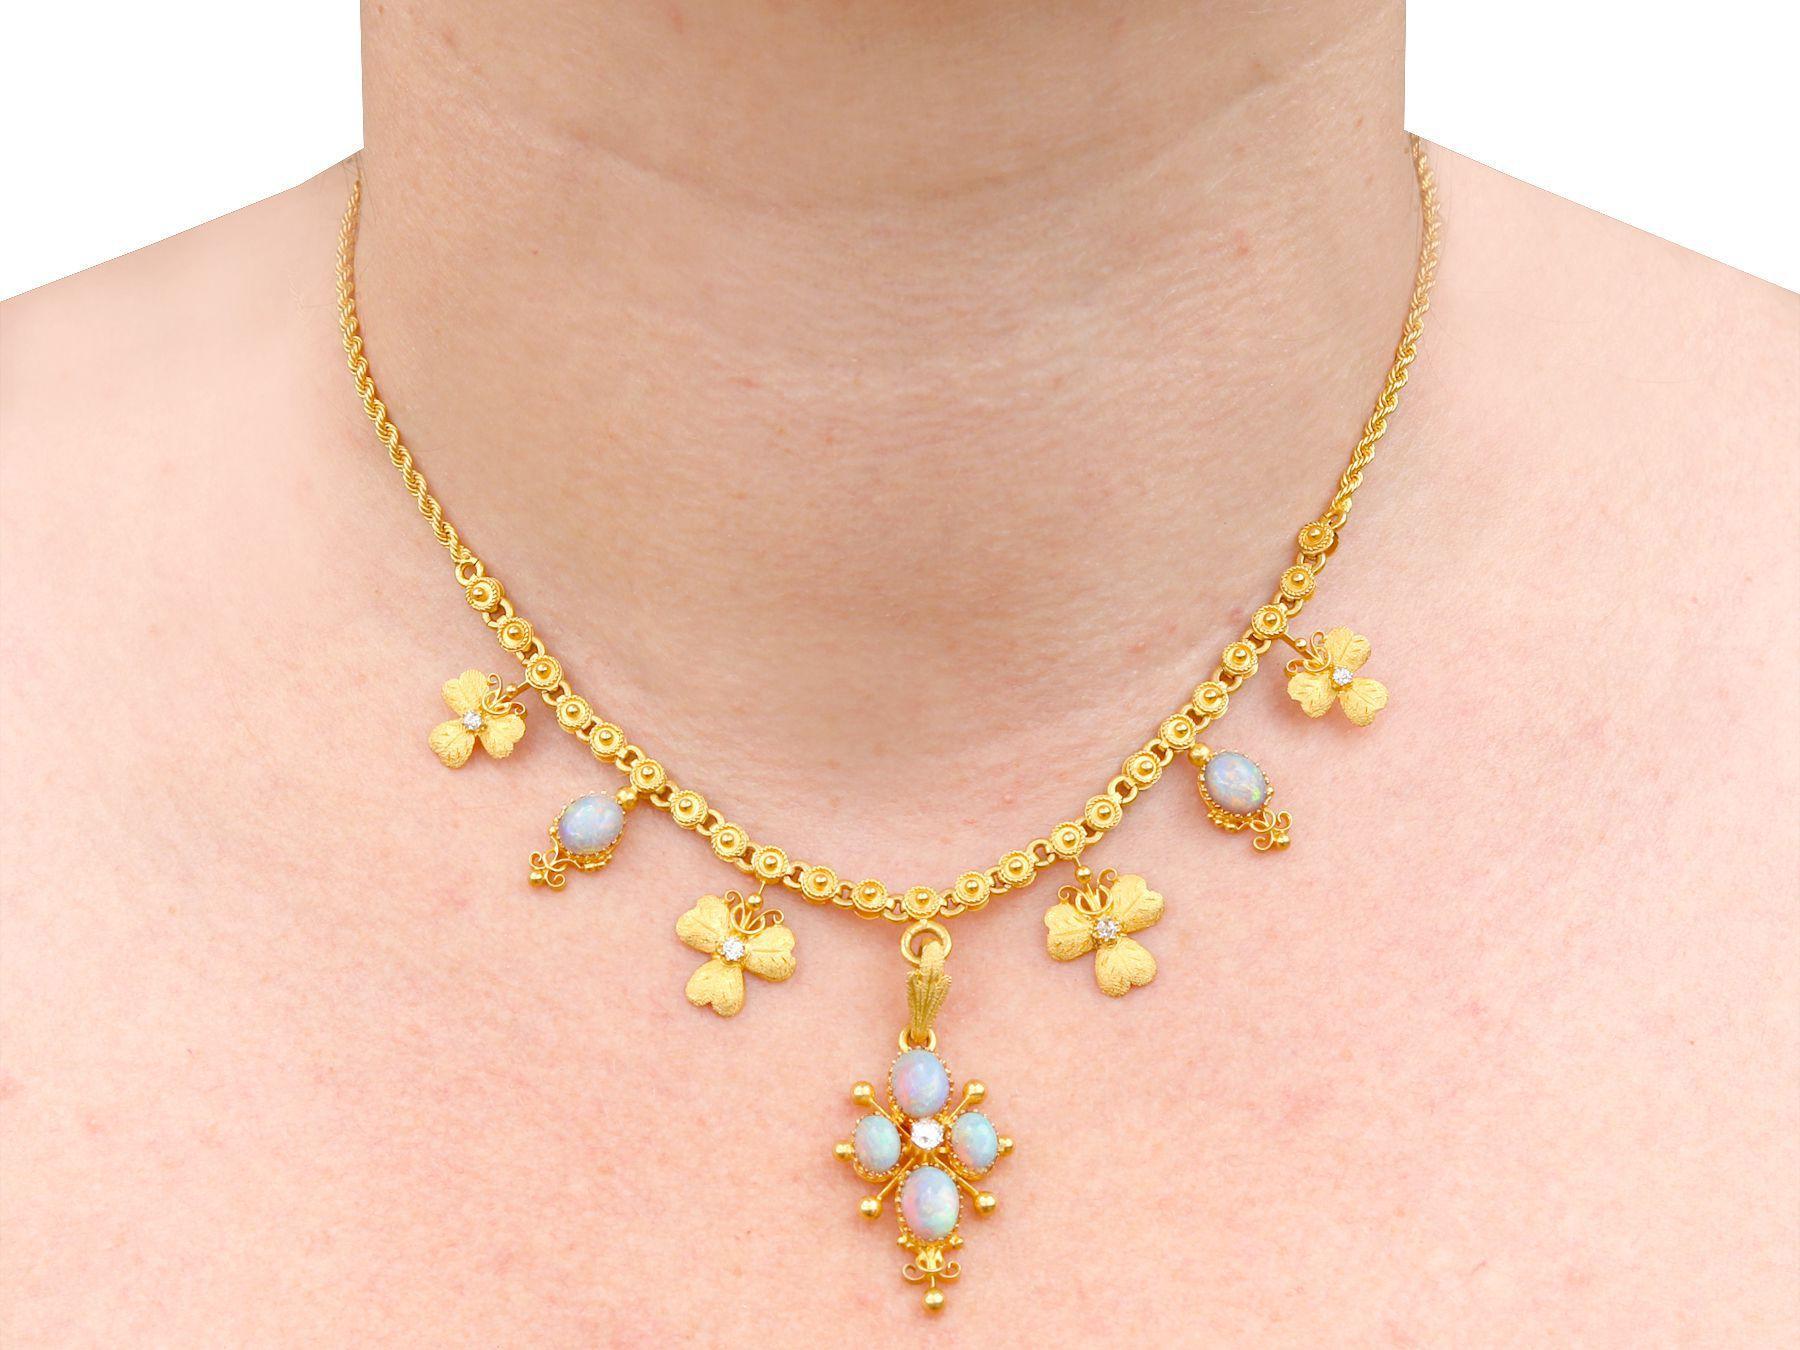 Antique 3.45 Carat Opal and Diamond 22k Yellow Gold Necklace, Circa 1890 In Excellent Condition For Sale In Jesmond, Newcastle Upon Tyne